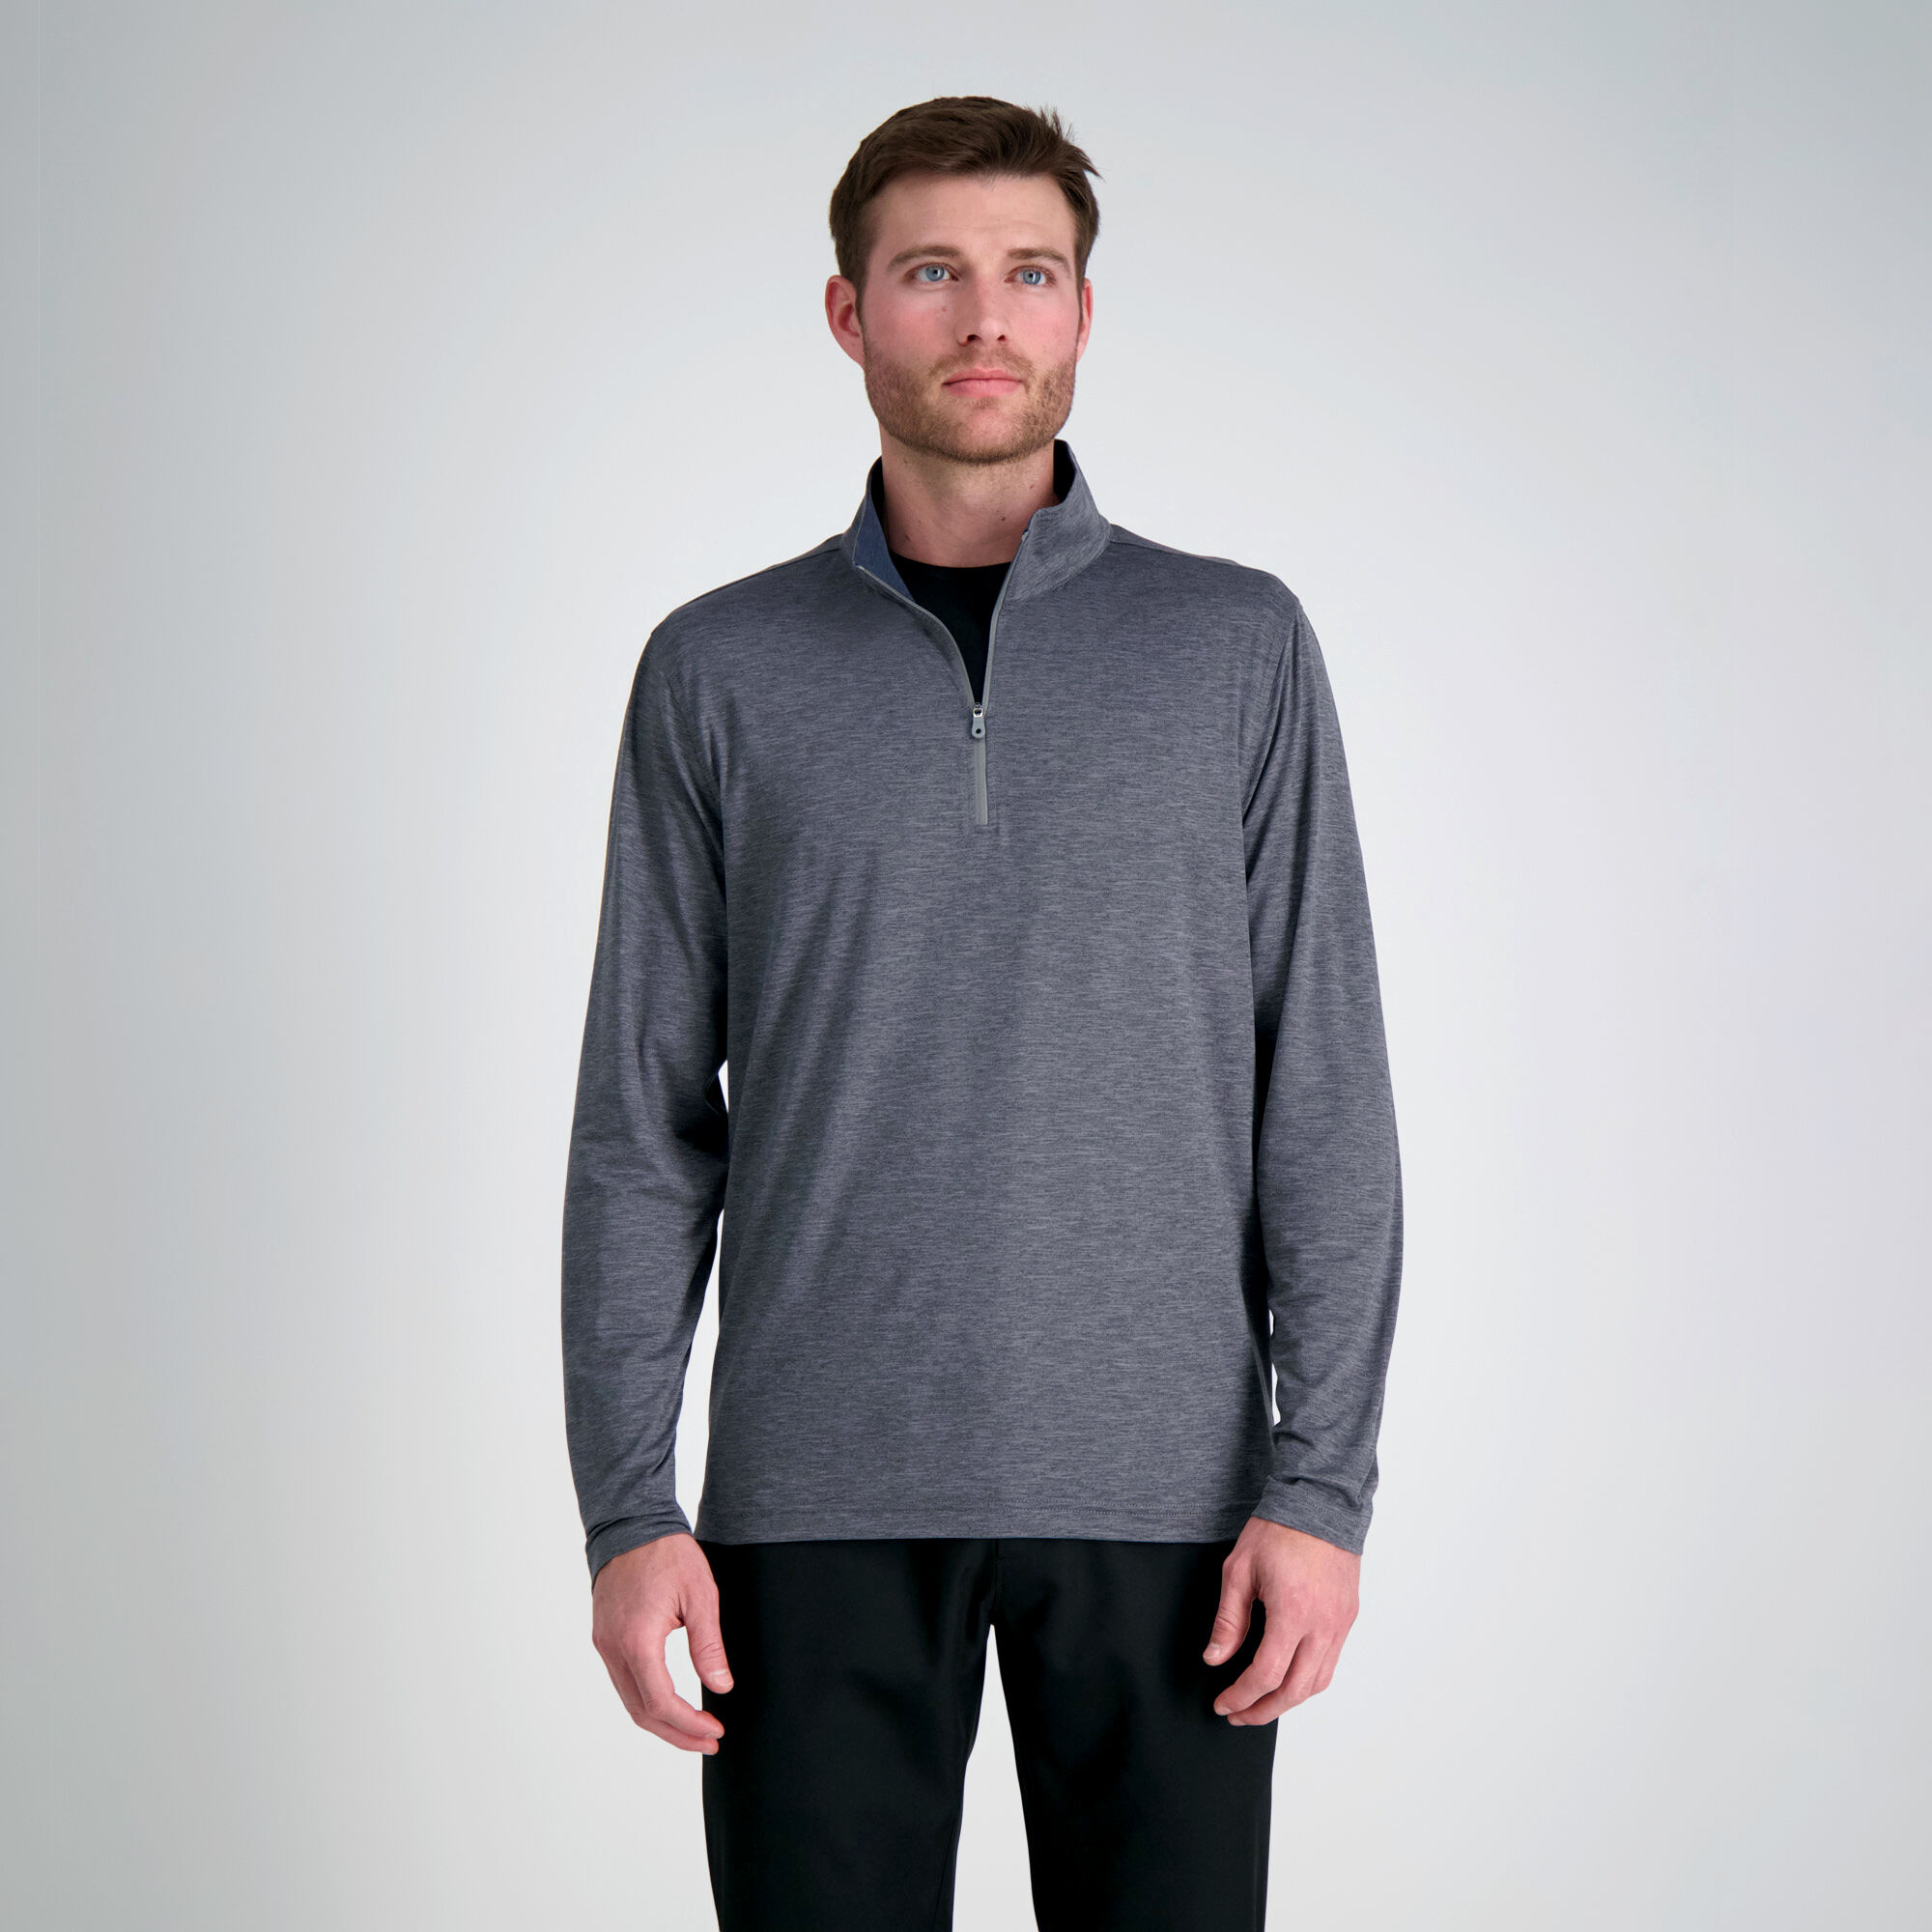 Haggar The Active Series Quarter Zip Heather Jersey Charcoal Htr (HK10074 Clothing Shirts & Tops) photo